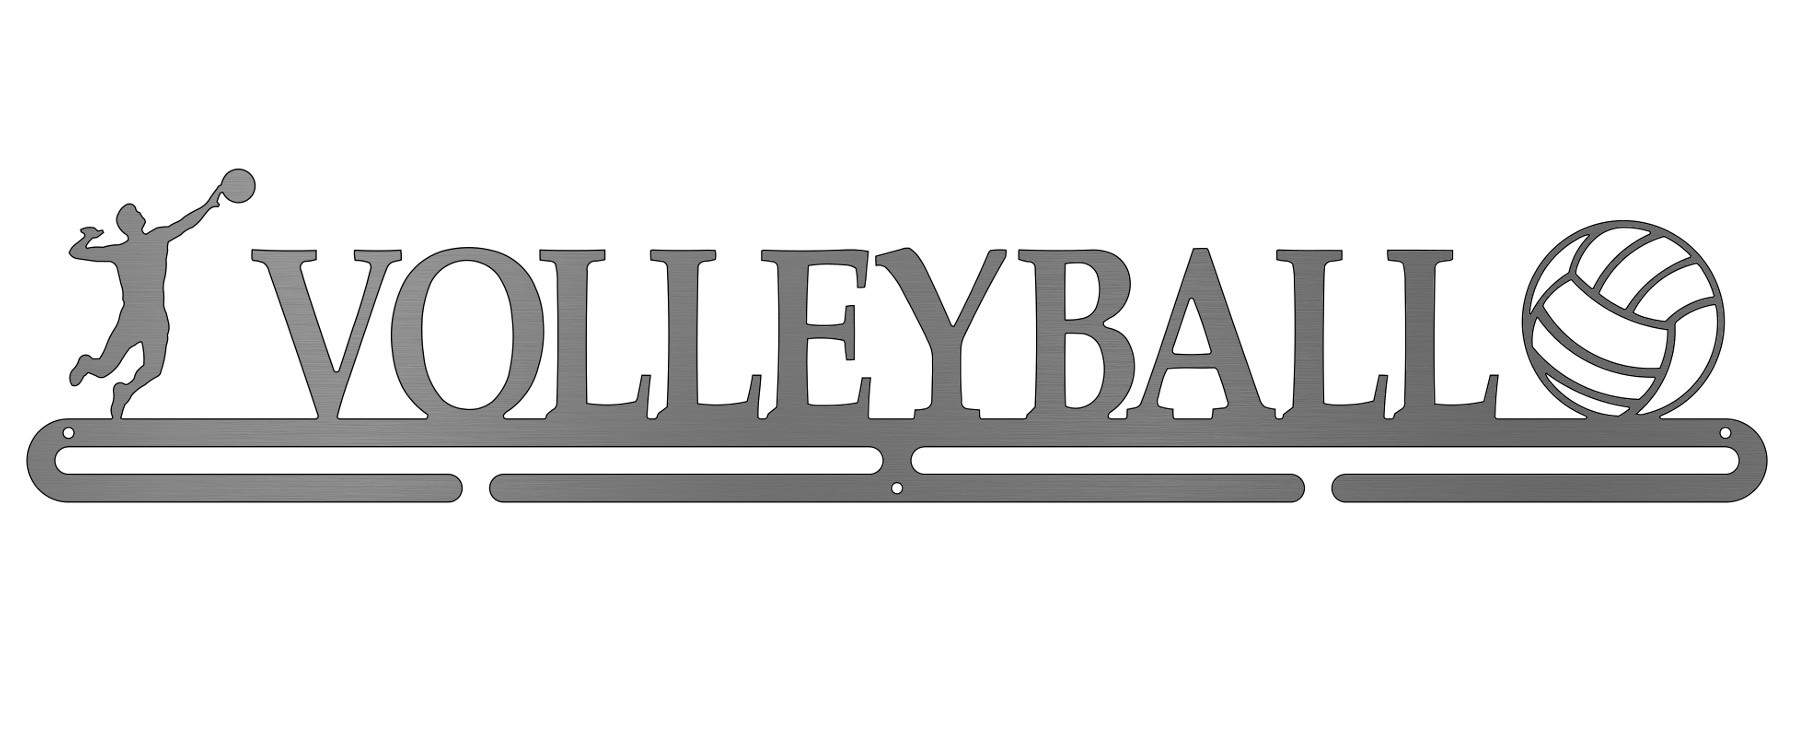 Volleyball - Male